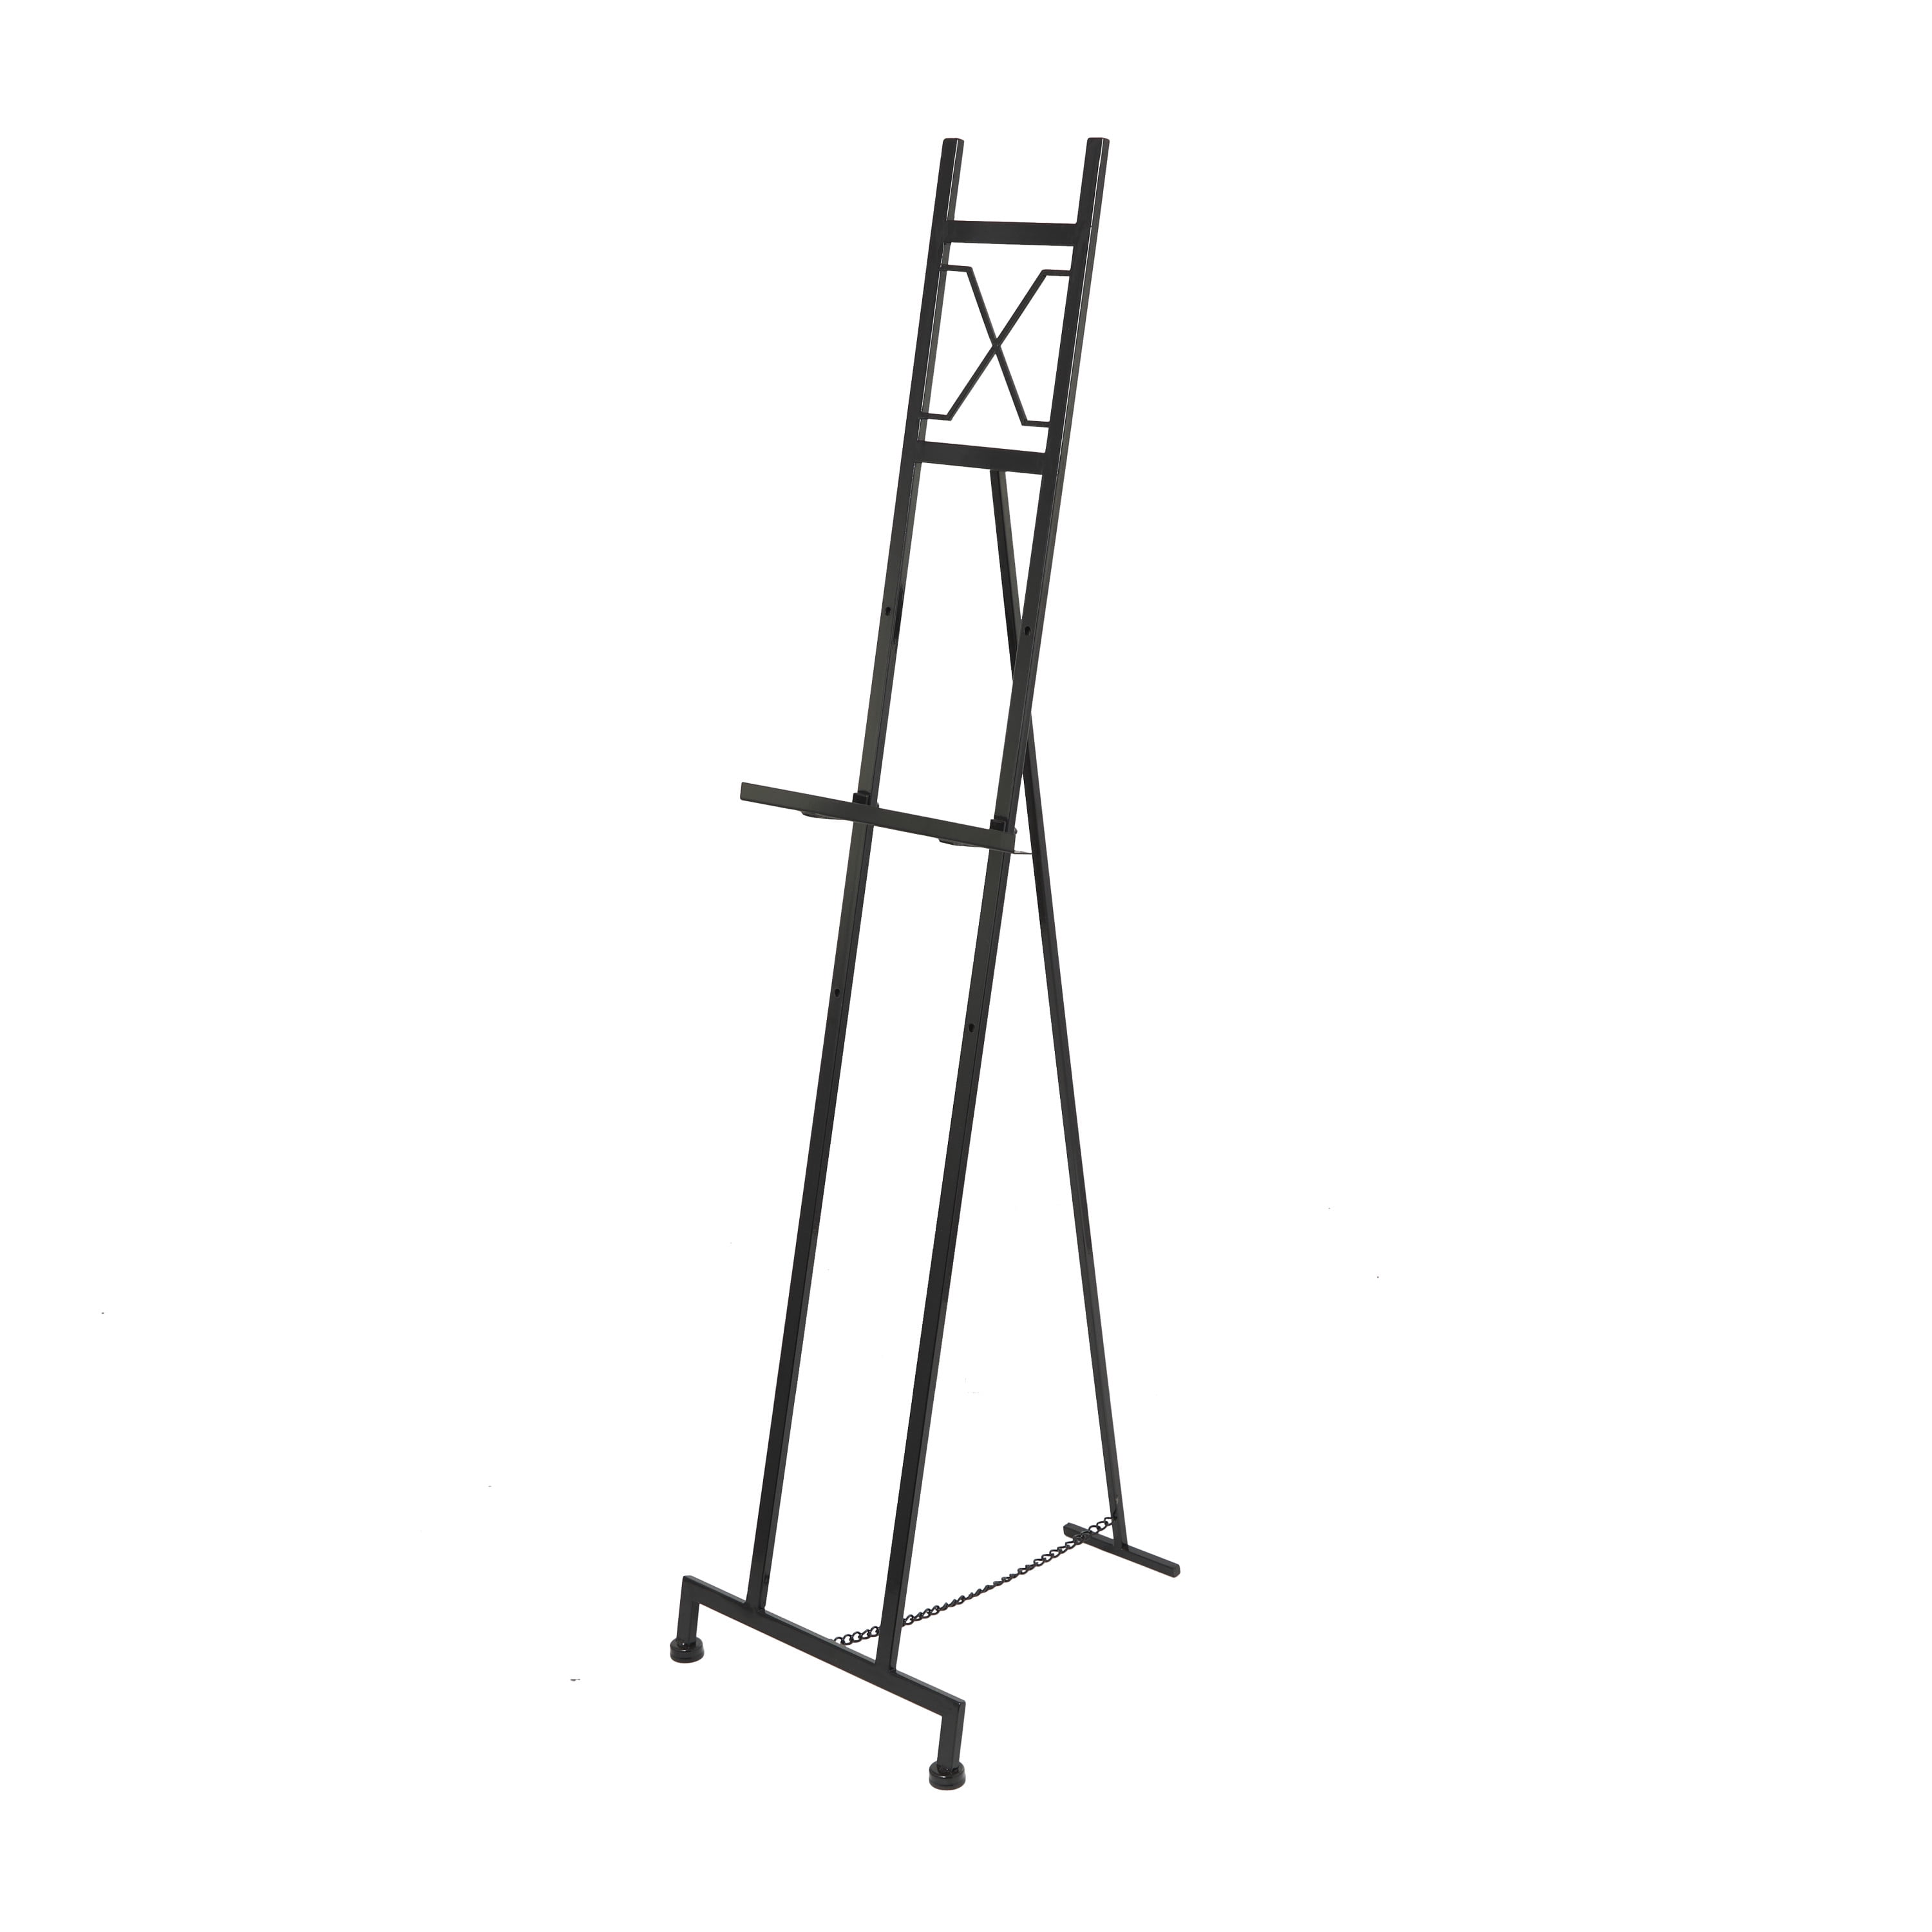 US Art Supply 64 High x 27-1/2 Wide Black Wooden Tripod Display Floor Easel & Artist Easel, Adjustable Tray Chain